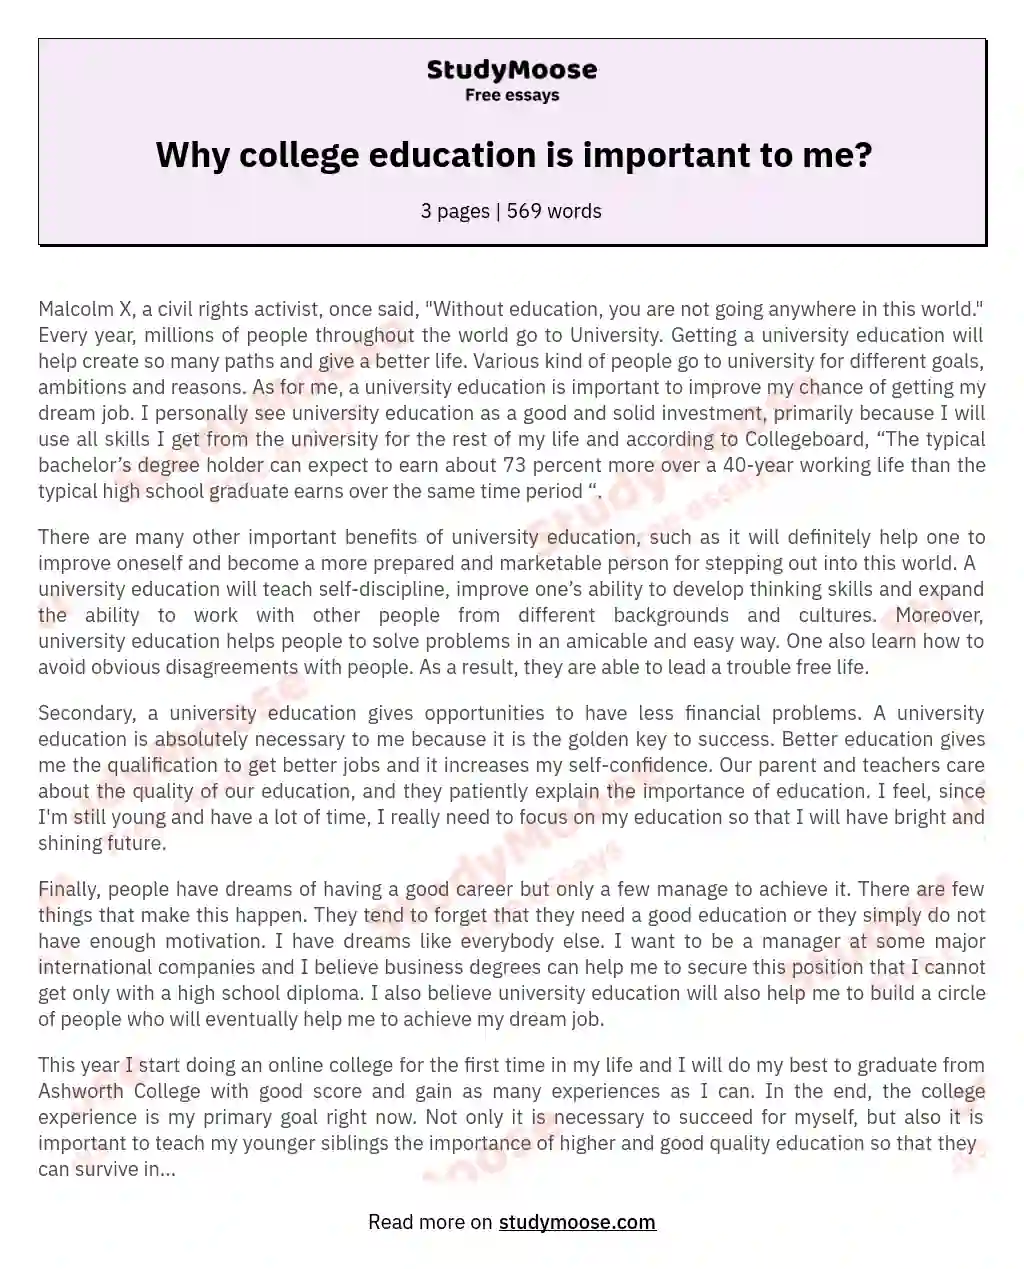 why is college education important to me essay